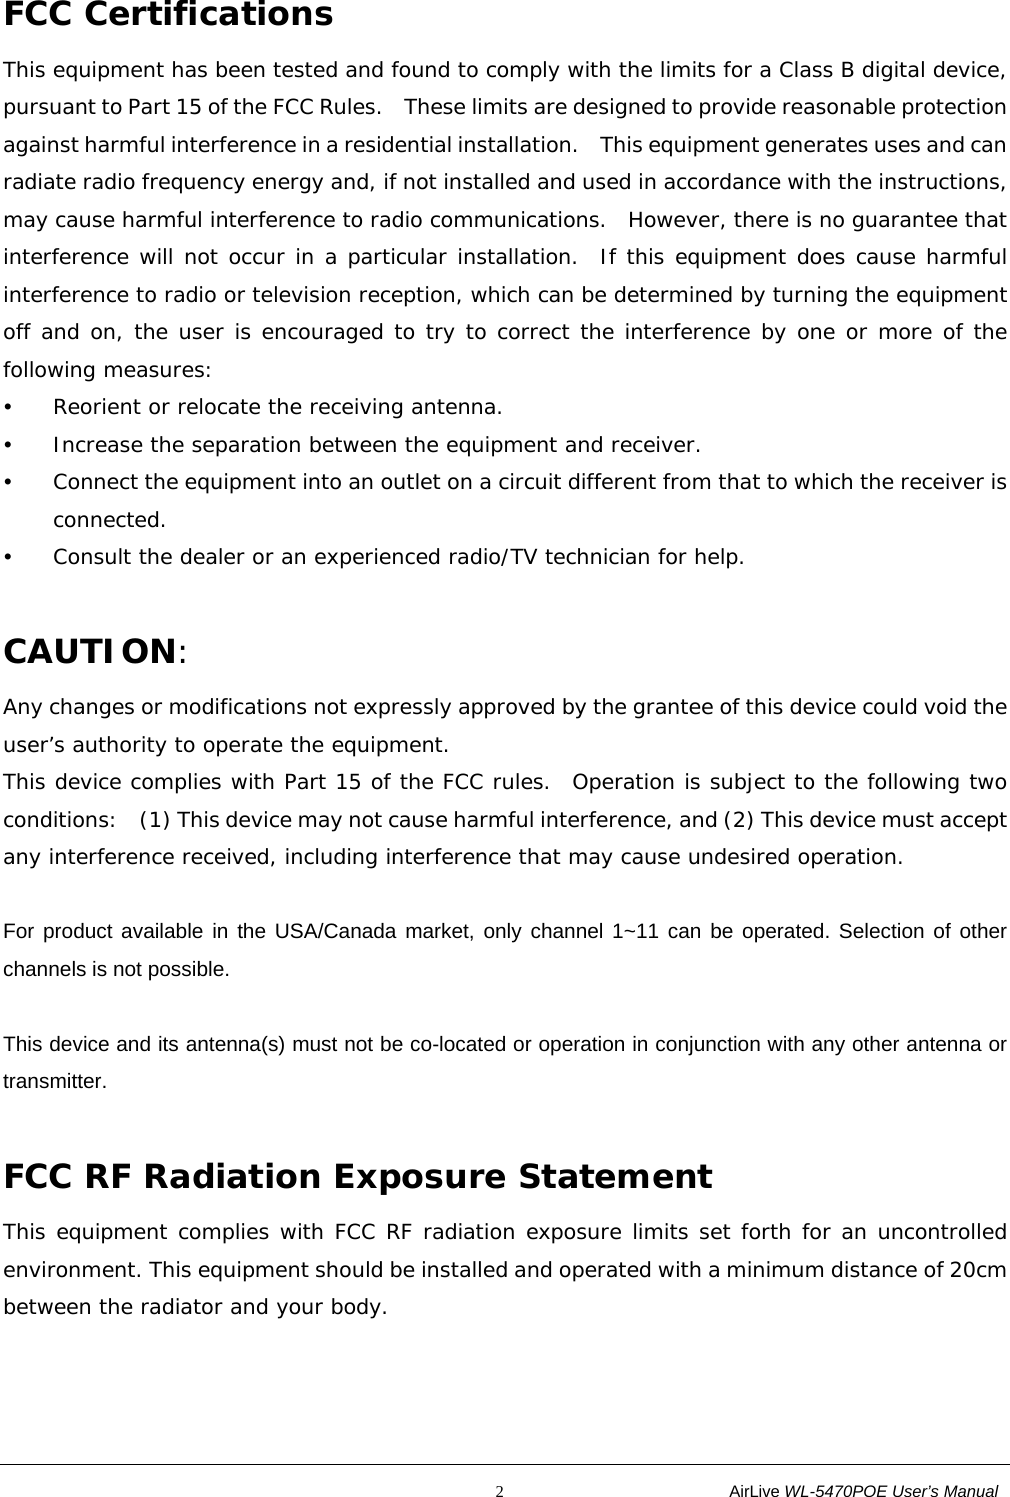                                                           2                           AirLive WL-5470POE User’s Manual FCC Certifications This equipment has been tested and found to comply with the limits for a Class B digital device, pursuant to Part 15 of the FCC Rules.    These limits are designed to provide reasonable protection against harmful interference in a residential installation.  This equipment generates uses and can radiate radio frequency energy and, if not installed and used in accordance with the instructions, may cause harmful interference to radio communications.  However, there is no guarantee that interference will not occur in a particular installation.  If this equipment does cause harmful interference to radio or television reception, which can be determined by turning the equipment off and on, the user is encouraged to try to correct the interference by one or more of the following measures: y Reorient or relocate the receiving antenna. y Increase the separation between the equipment and receiver. y Connect the equipment into an outlet on a circuit different from that to which the receiver is connected. y Consult the dealer or an experienced radio/TV technician for help. CAUTION: Any changes or modifications not expressly approved by the grantee of this device could void the user’s authority to operate the equipment.  This device complies with Part 15 of the FCC rules.  Operation is subject to the following two conditions:    (1) This device may not cause harmful interference, and (2) This device must accept any interference received, including interference that may cause undesired operation. For product available in the USA/Canada market, only channel 1~11 can be operated. Selection of other channels is not possible. This device and its antenna(s) must not be co-located or operation in conjunction with any other antenna or transmitter. FCC RF Radiation Exposure Statement This equipment complies with FCC RF radiation exposure limits set forth for an uncontrolled environment. This equipment should be installed and operated with a minimum distance of 20cm between the radiator and your body.   